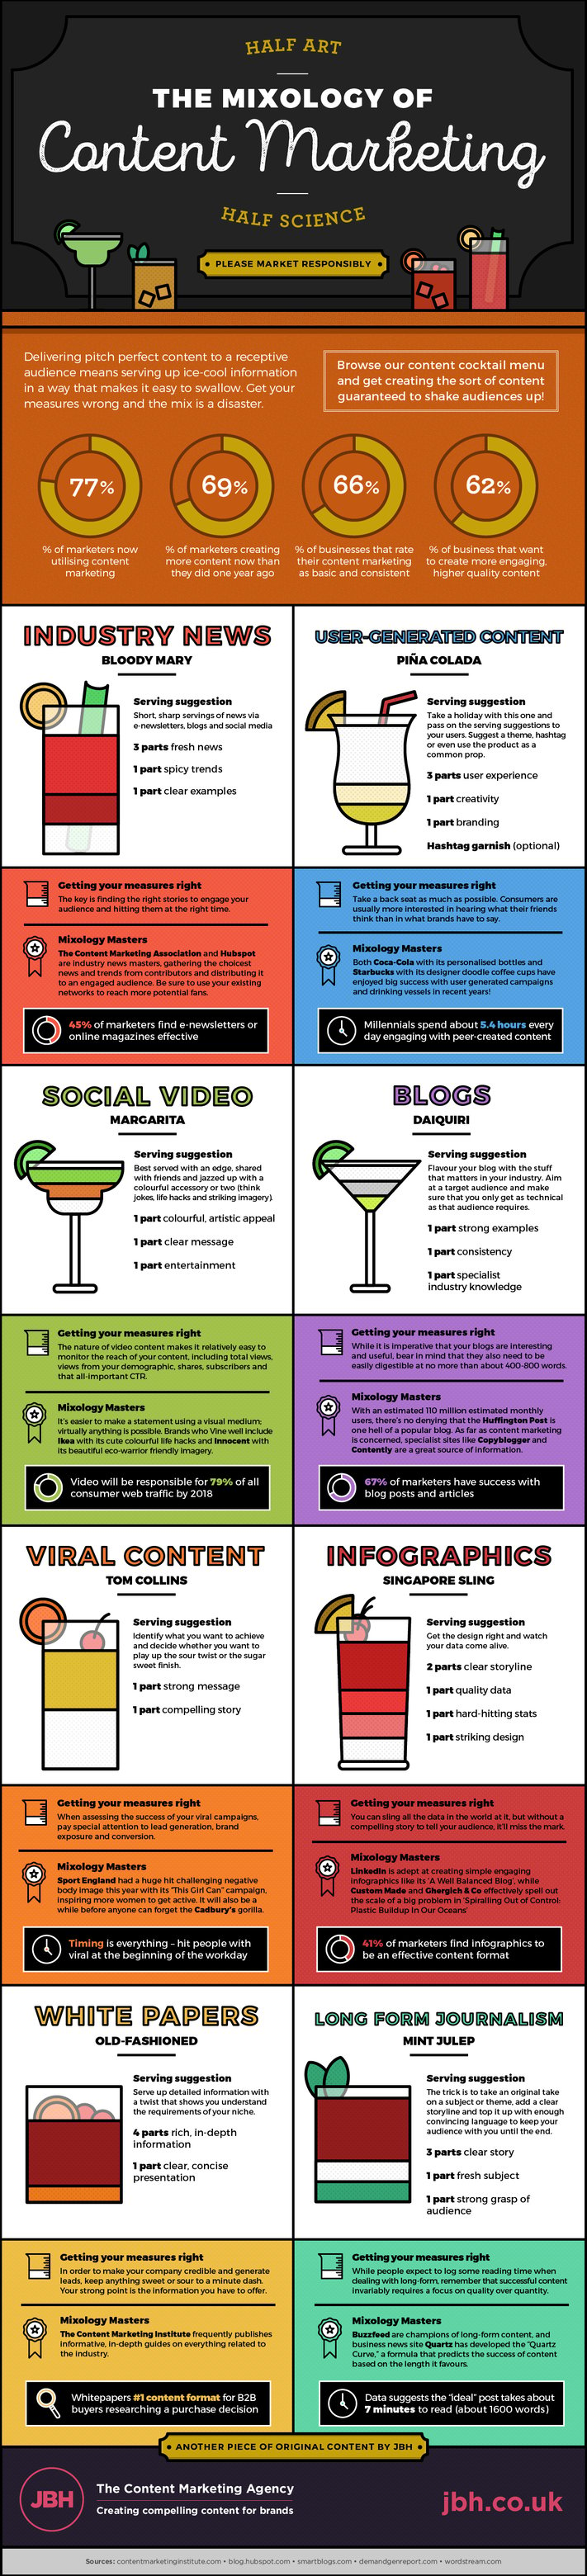 The_Mixology_of_Content_Marketing_Infographic.png